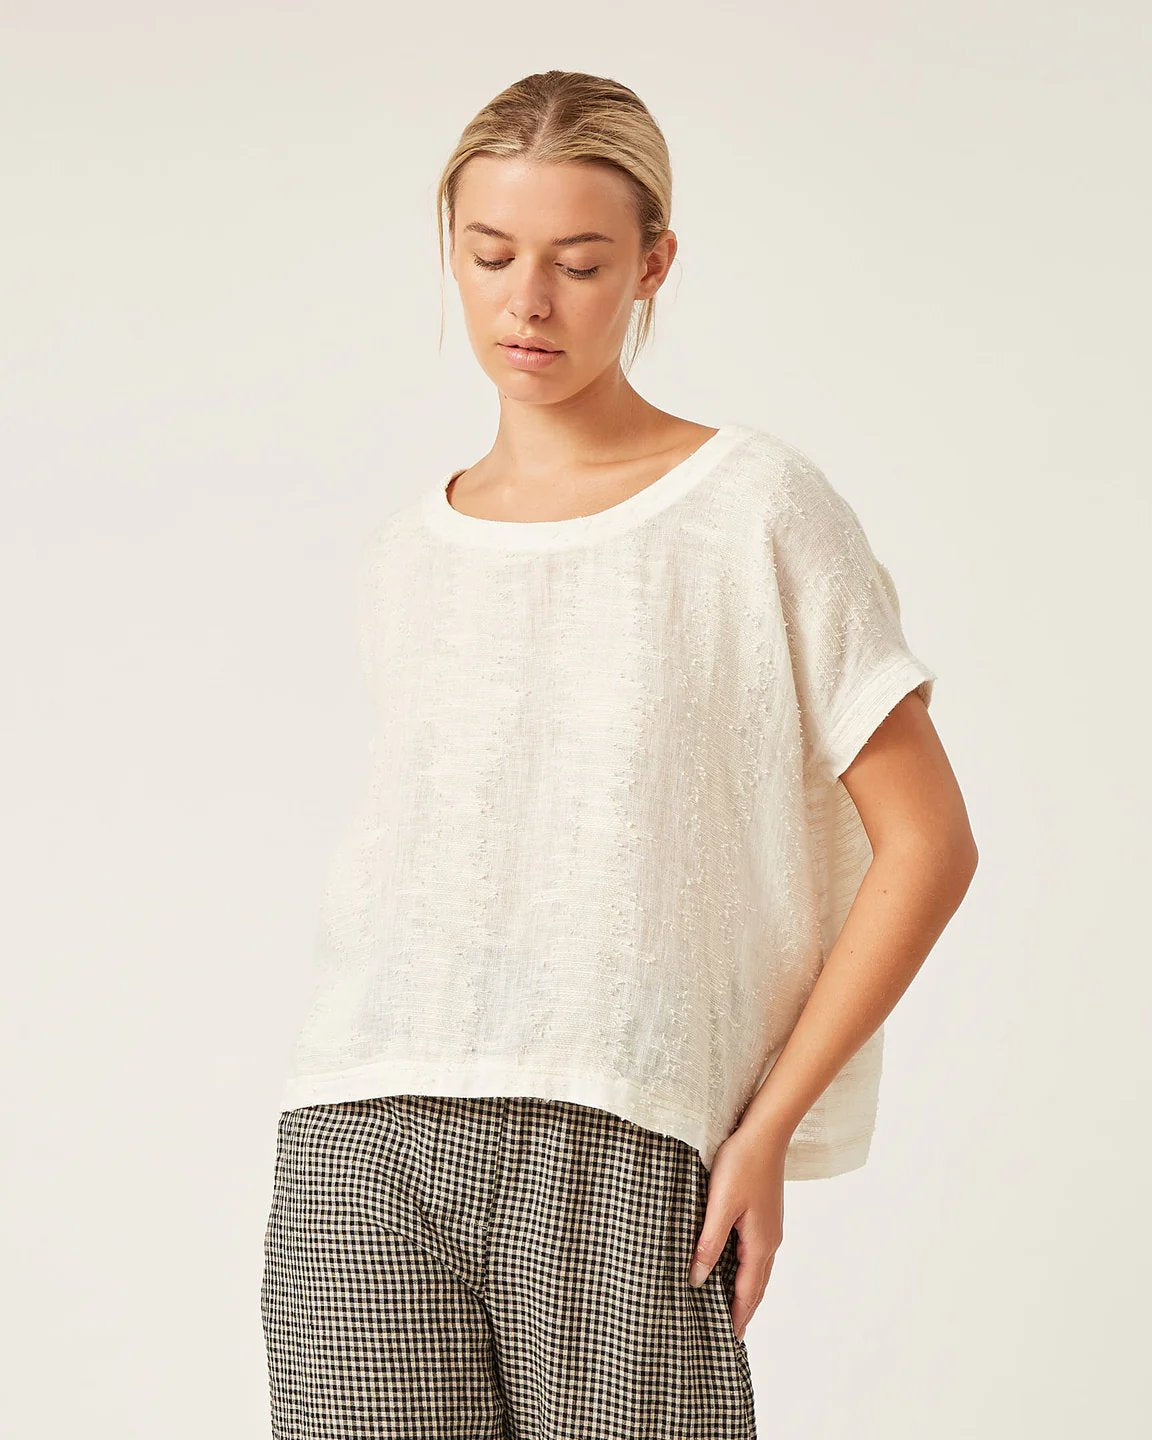 Naif Joanna Top in Textured Embroidered Linen